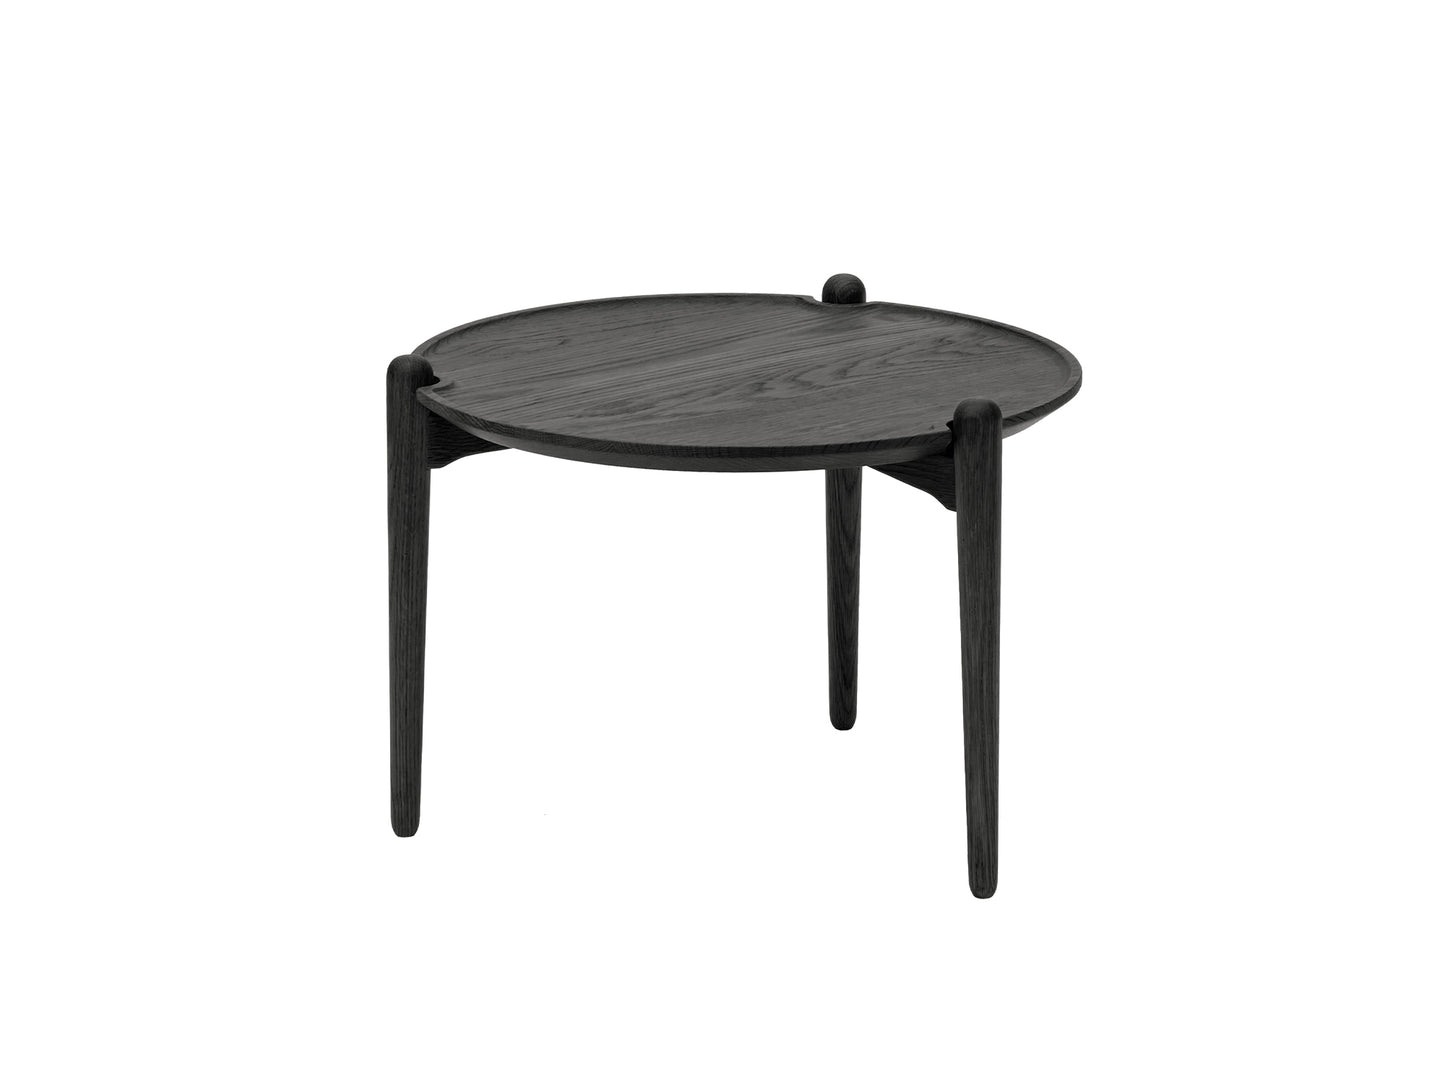 Aria Table by Design House Stockholm - Low / Black Lacquered Oak